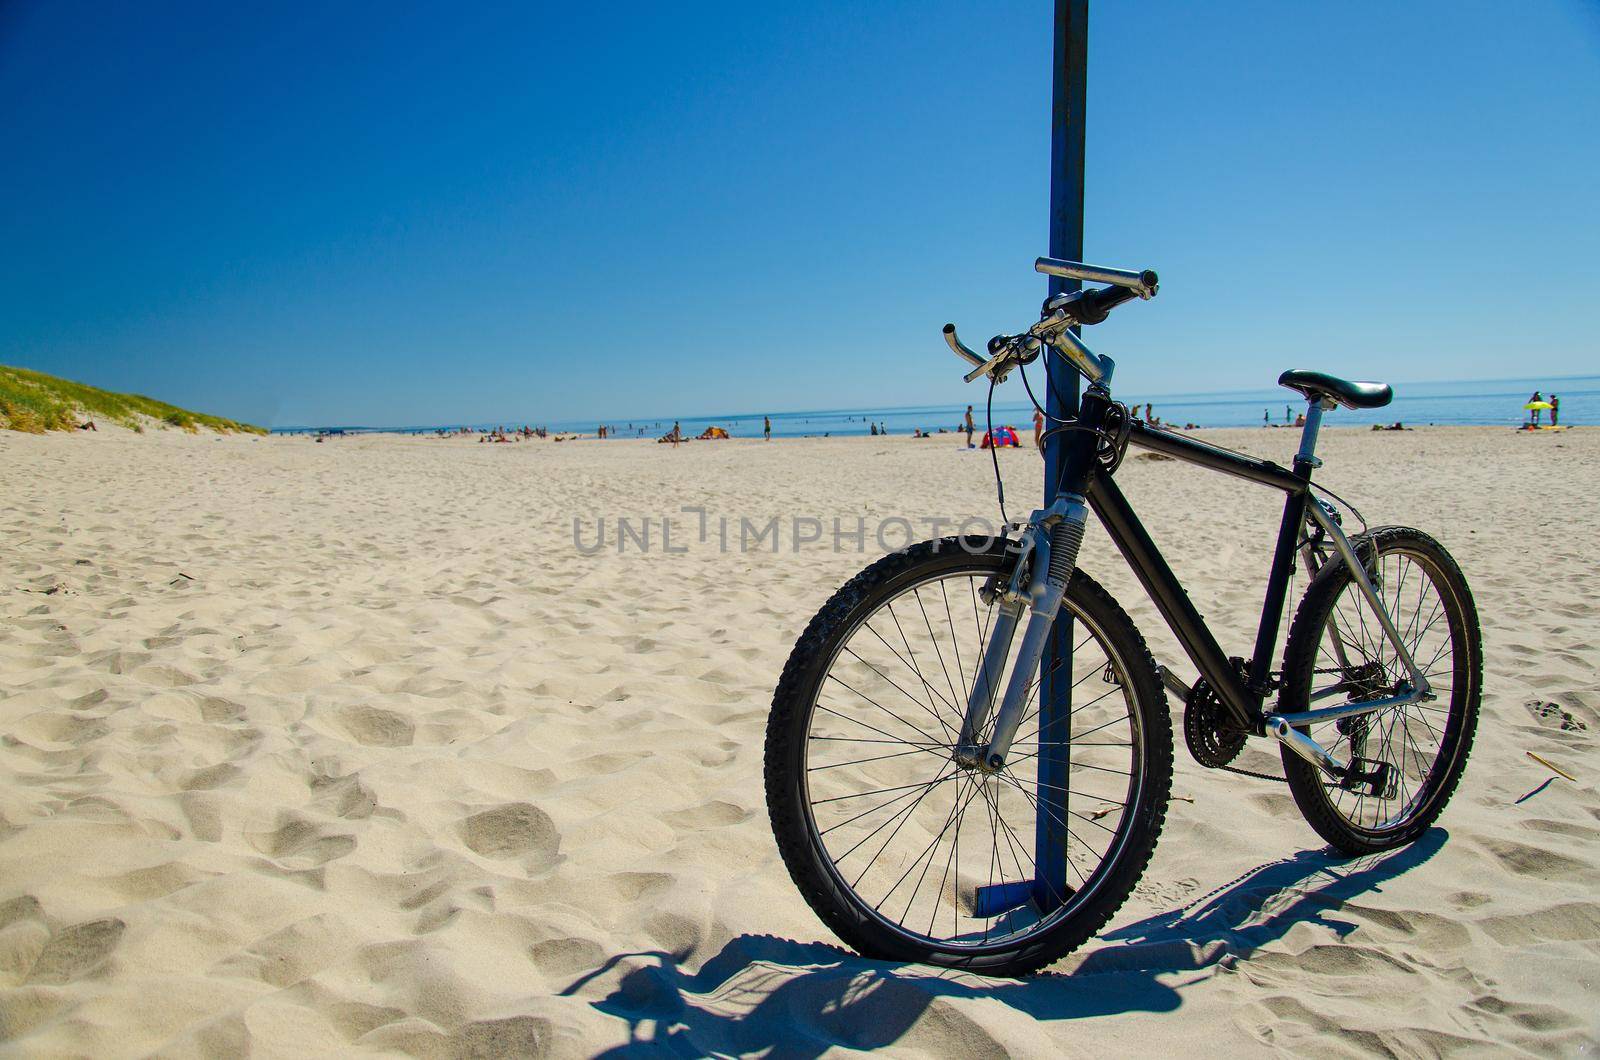 Bicycle bike on sandy yellow beach in front of blue sky in National Park Kursiu nerija, the Curonian Spit, Baltic sea, Lithuania